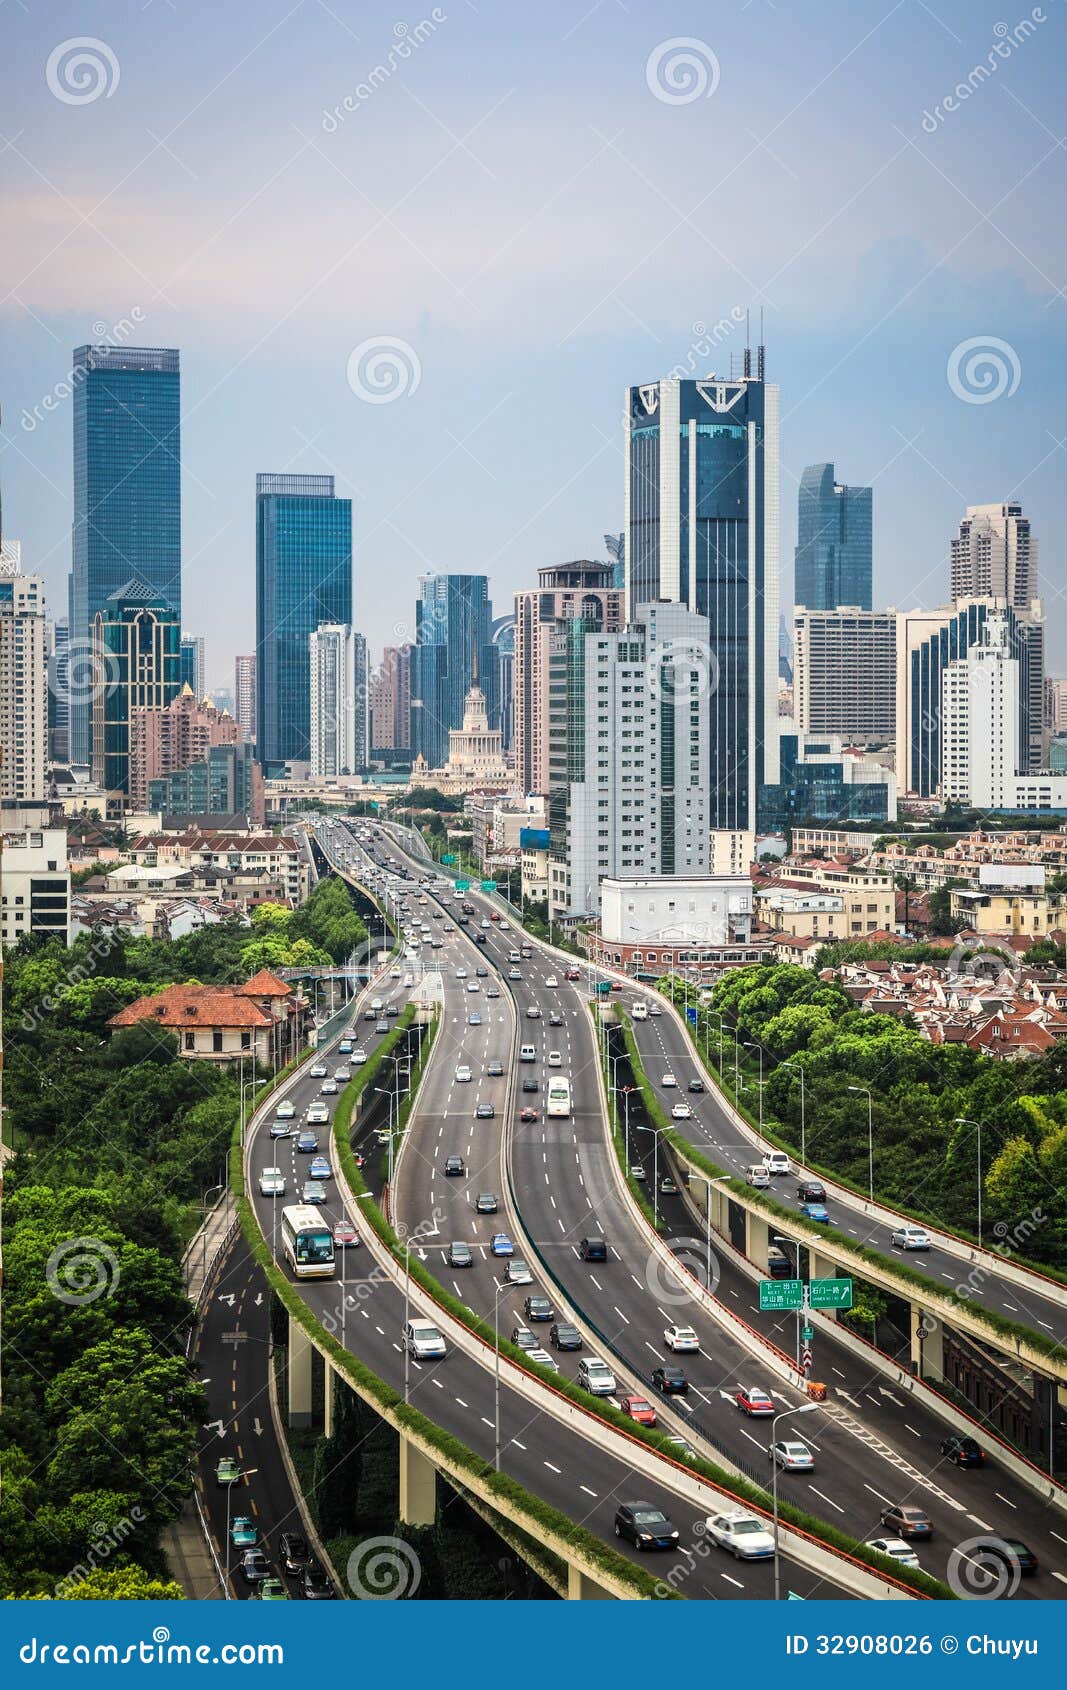 elevated road and modern city